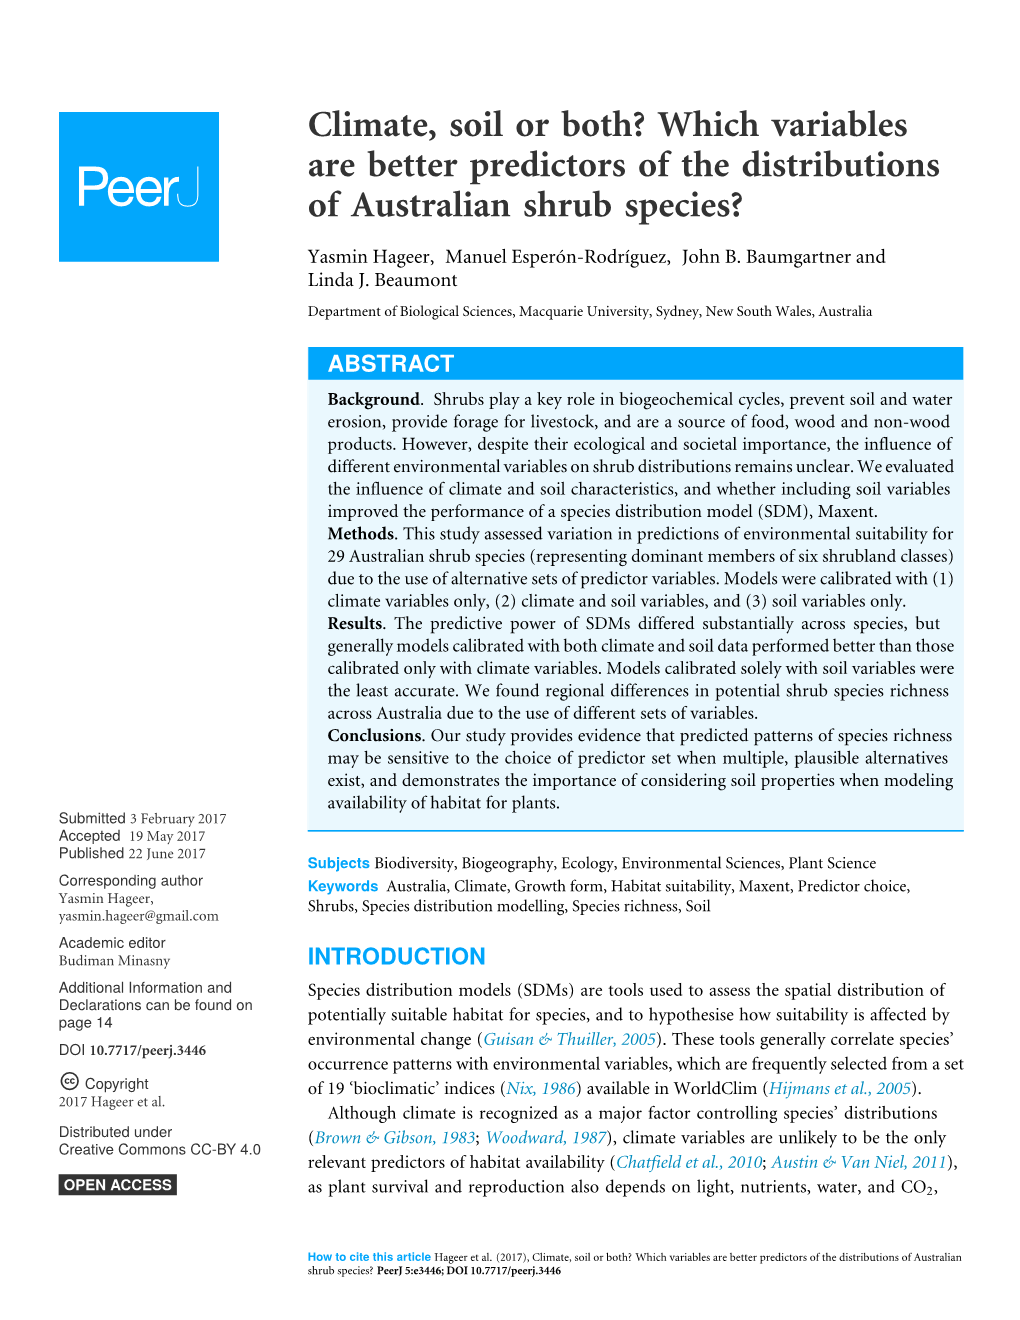 Climate, Soil Or Both? Which Variables Are Better Predictors of the Distributions of Australian Shrub Species?